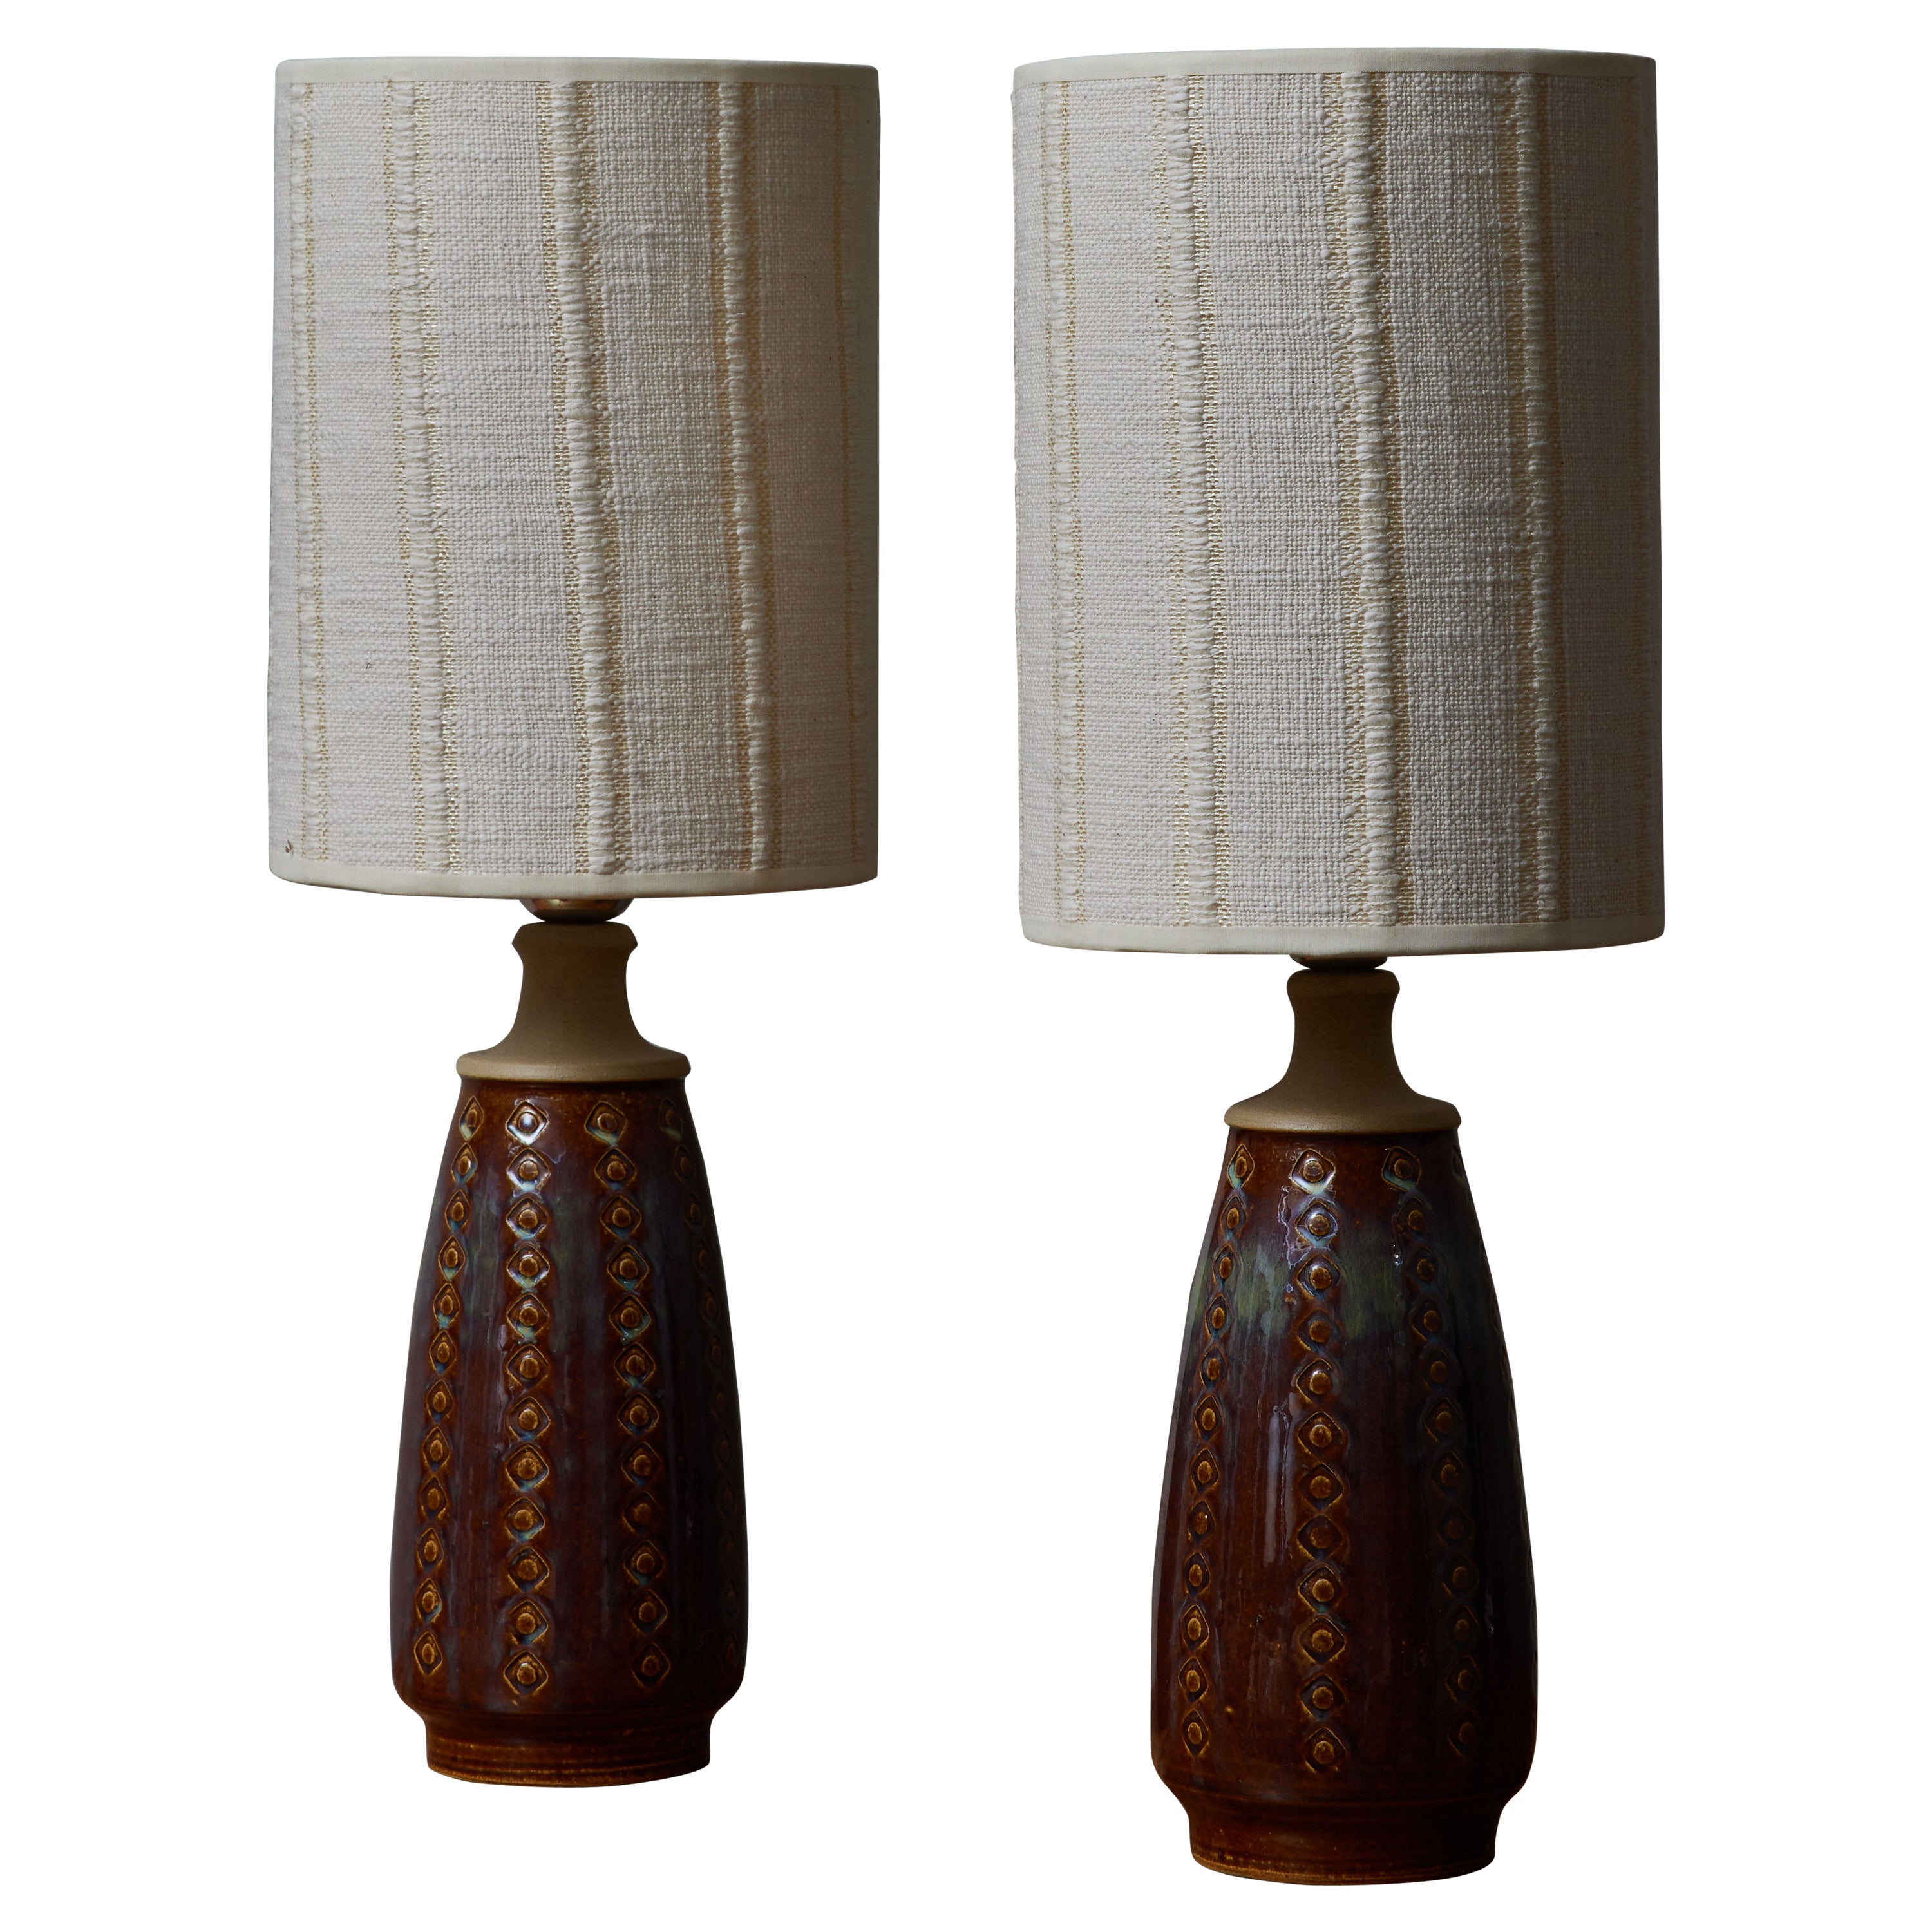 Pair of Ceramic Mod. Table Lamps by Søholm Stentøj